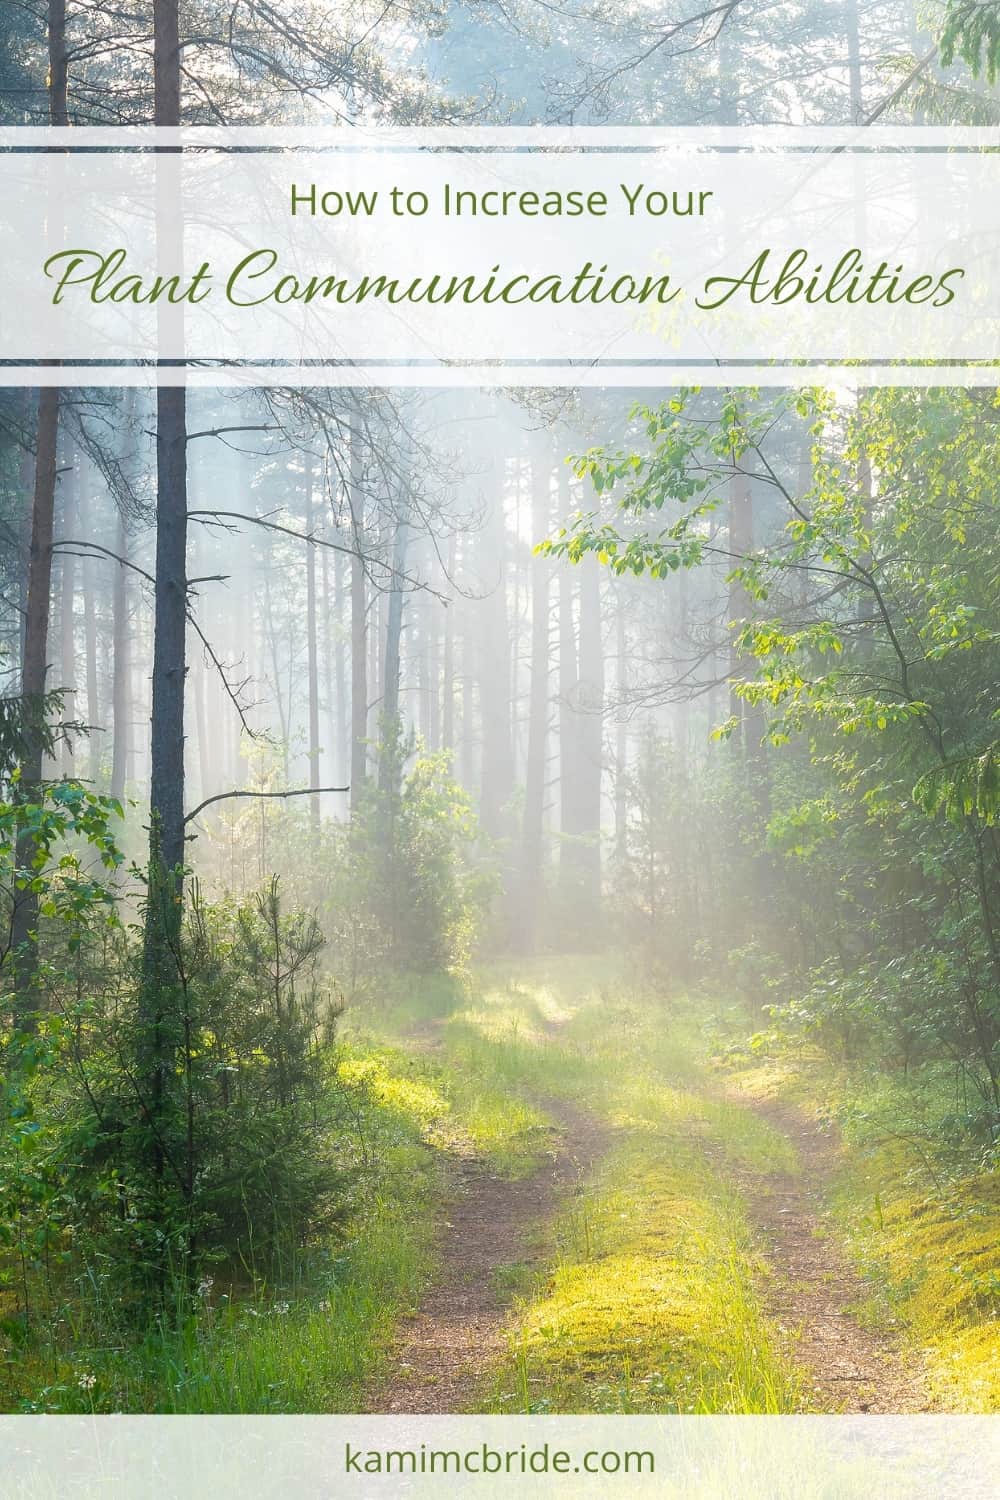 How to Increase Your Plant Communication Abilities